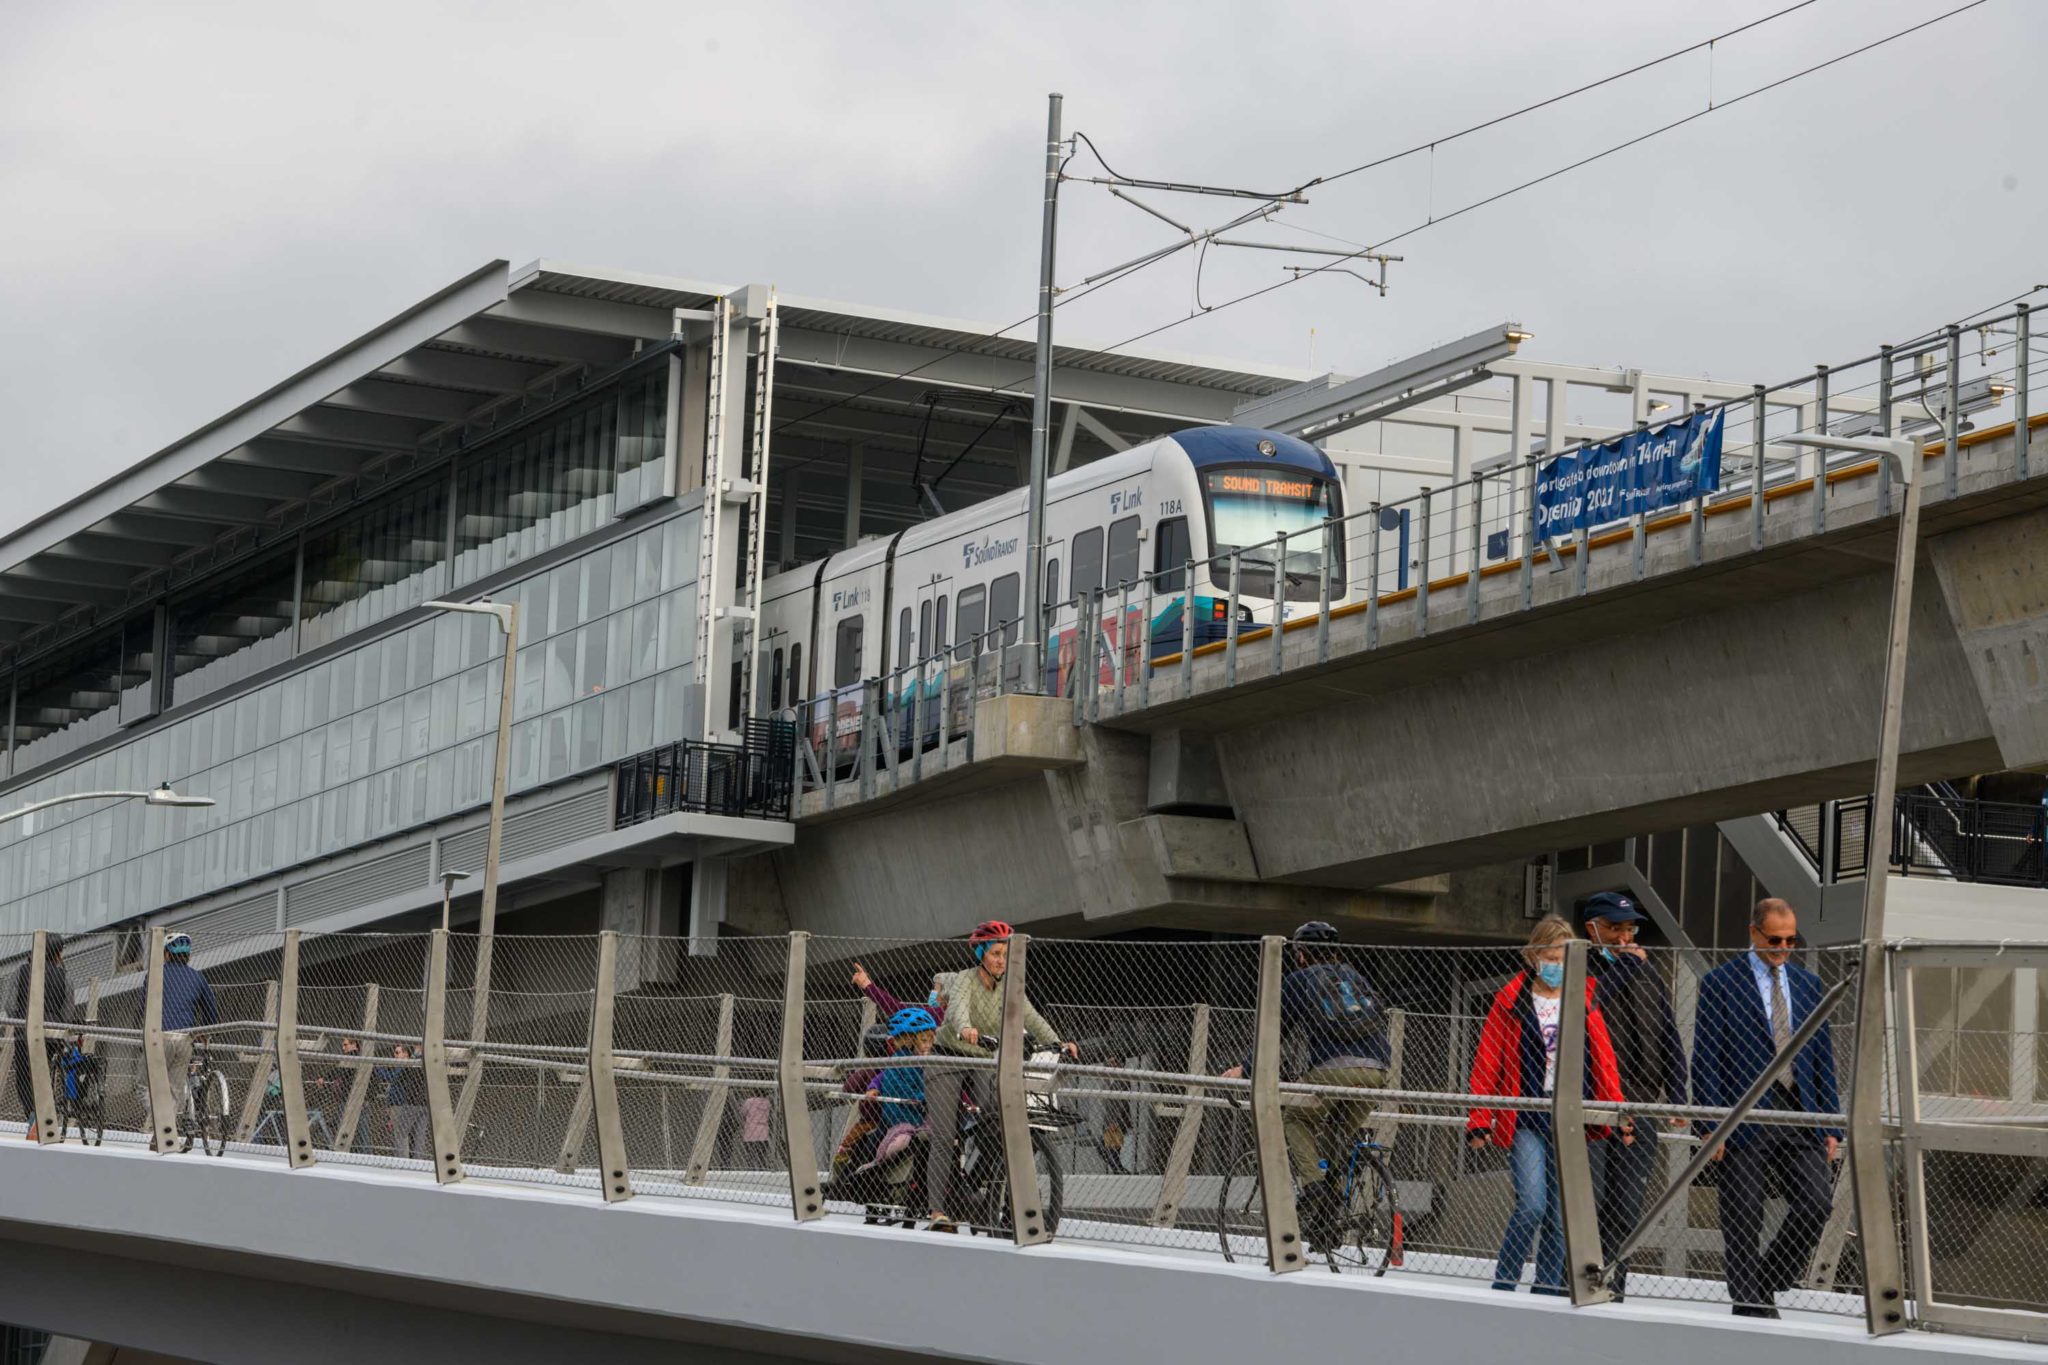 People walk and bike on the approach to the new John Lewis Memorial Bridge, as a light rail train departs from the new Northgate station in Seattle. The new bridge for people walking, rolling, and biking, along with the new light rail station, opened in October 2021.